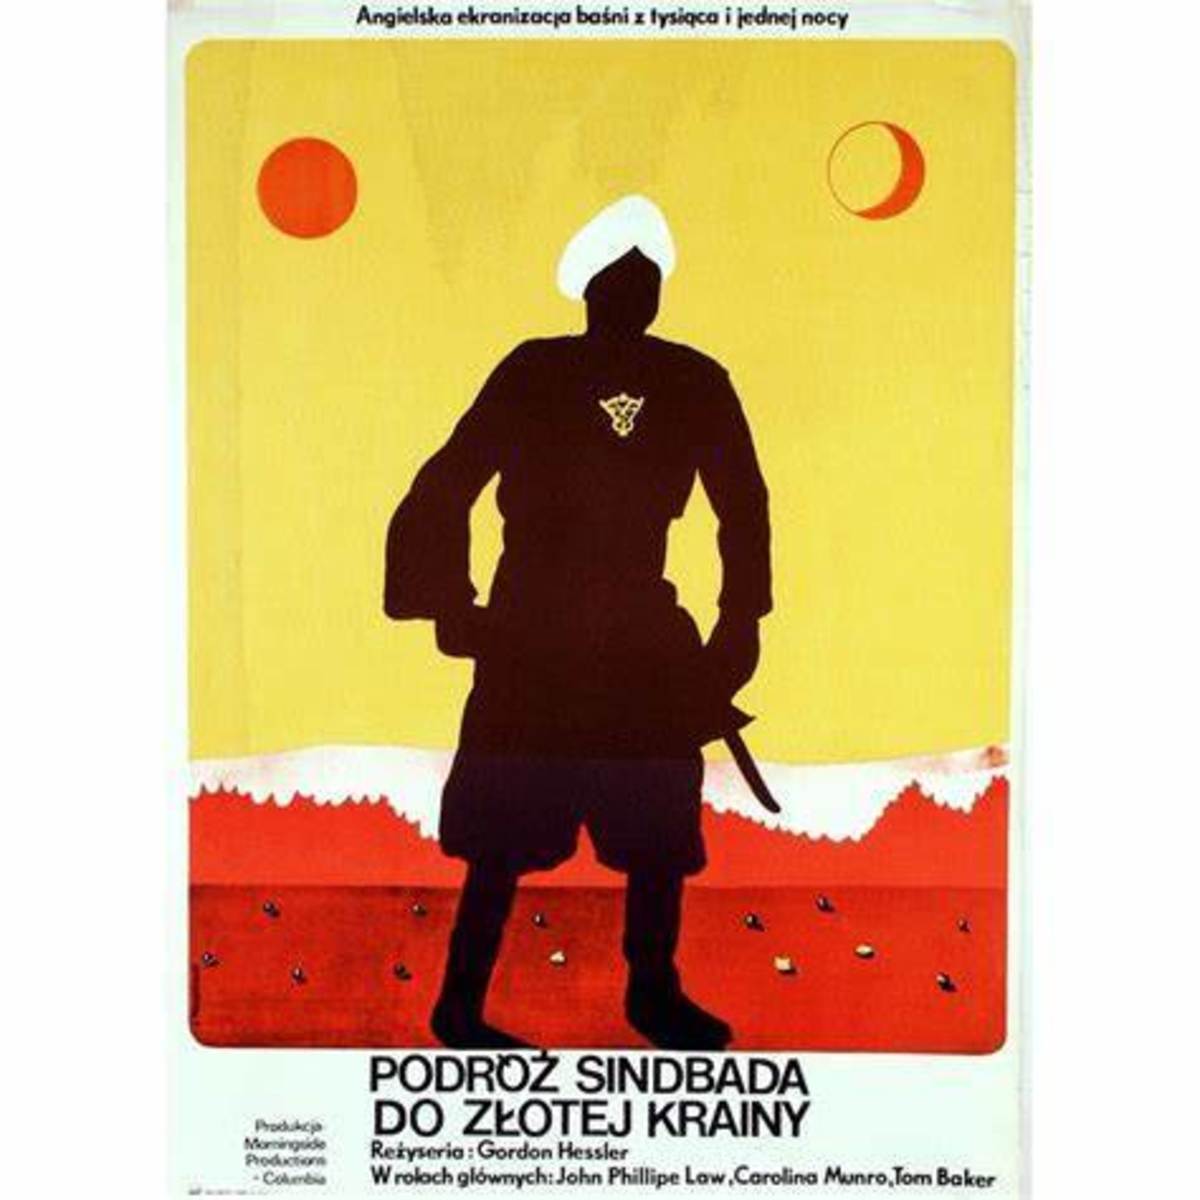 Stylized movie poster for the Polish release of The Golden Voyage of Sinbad.